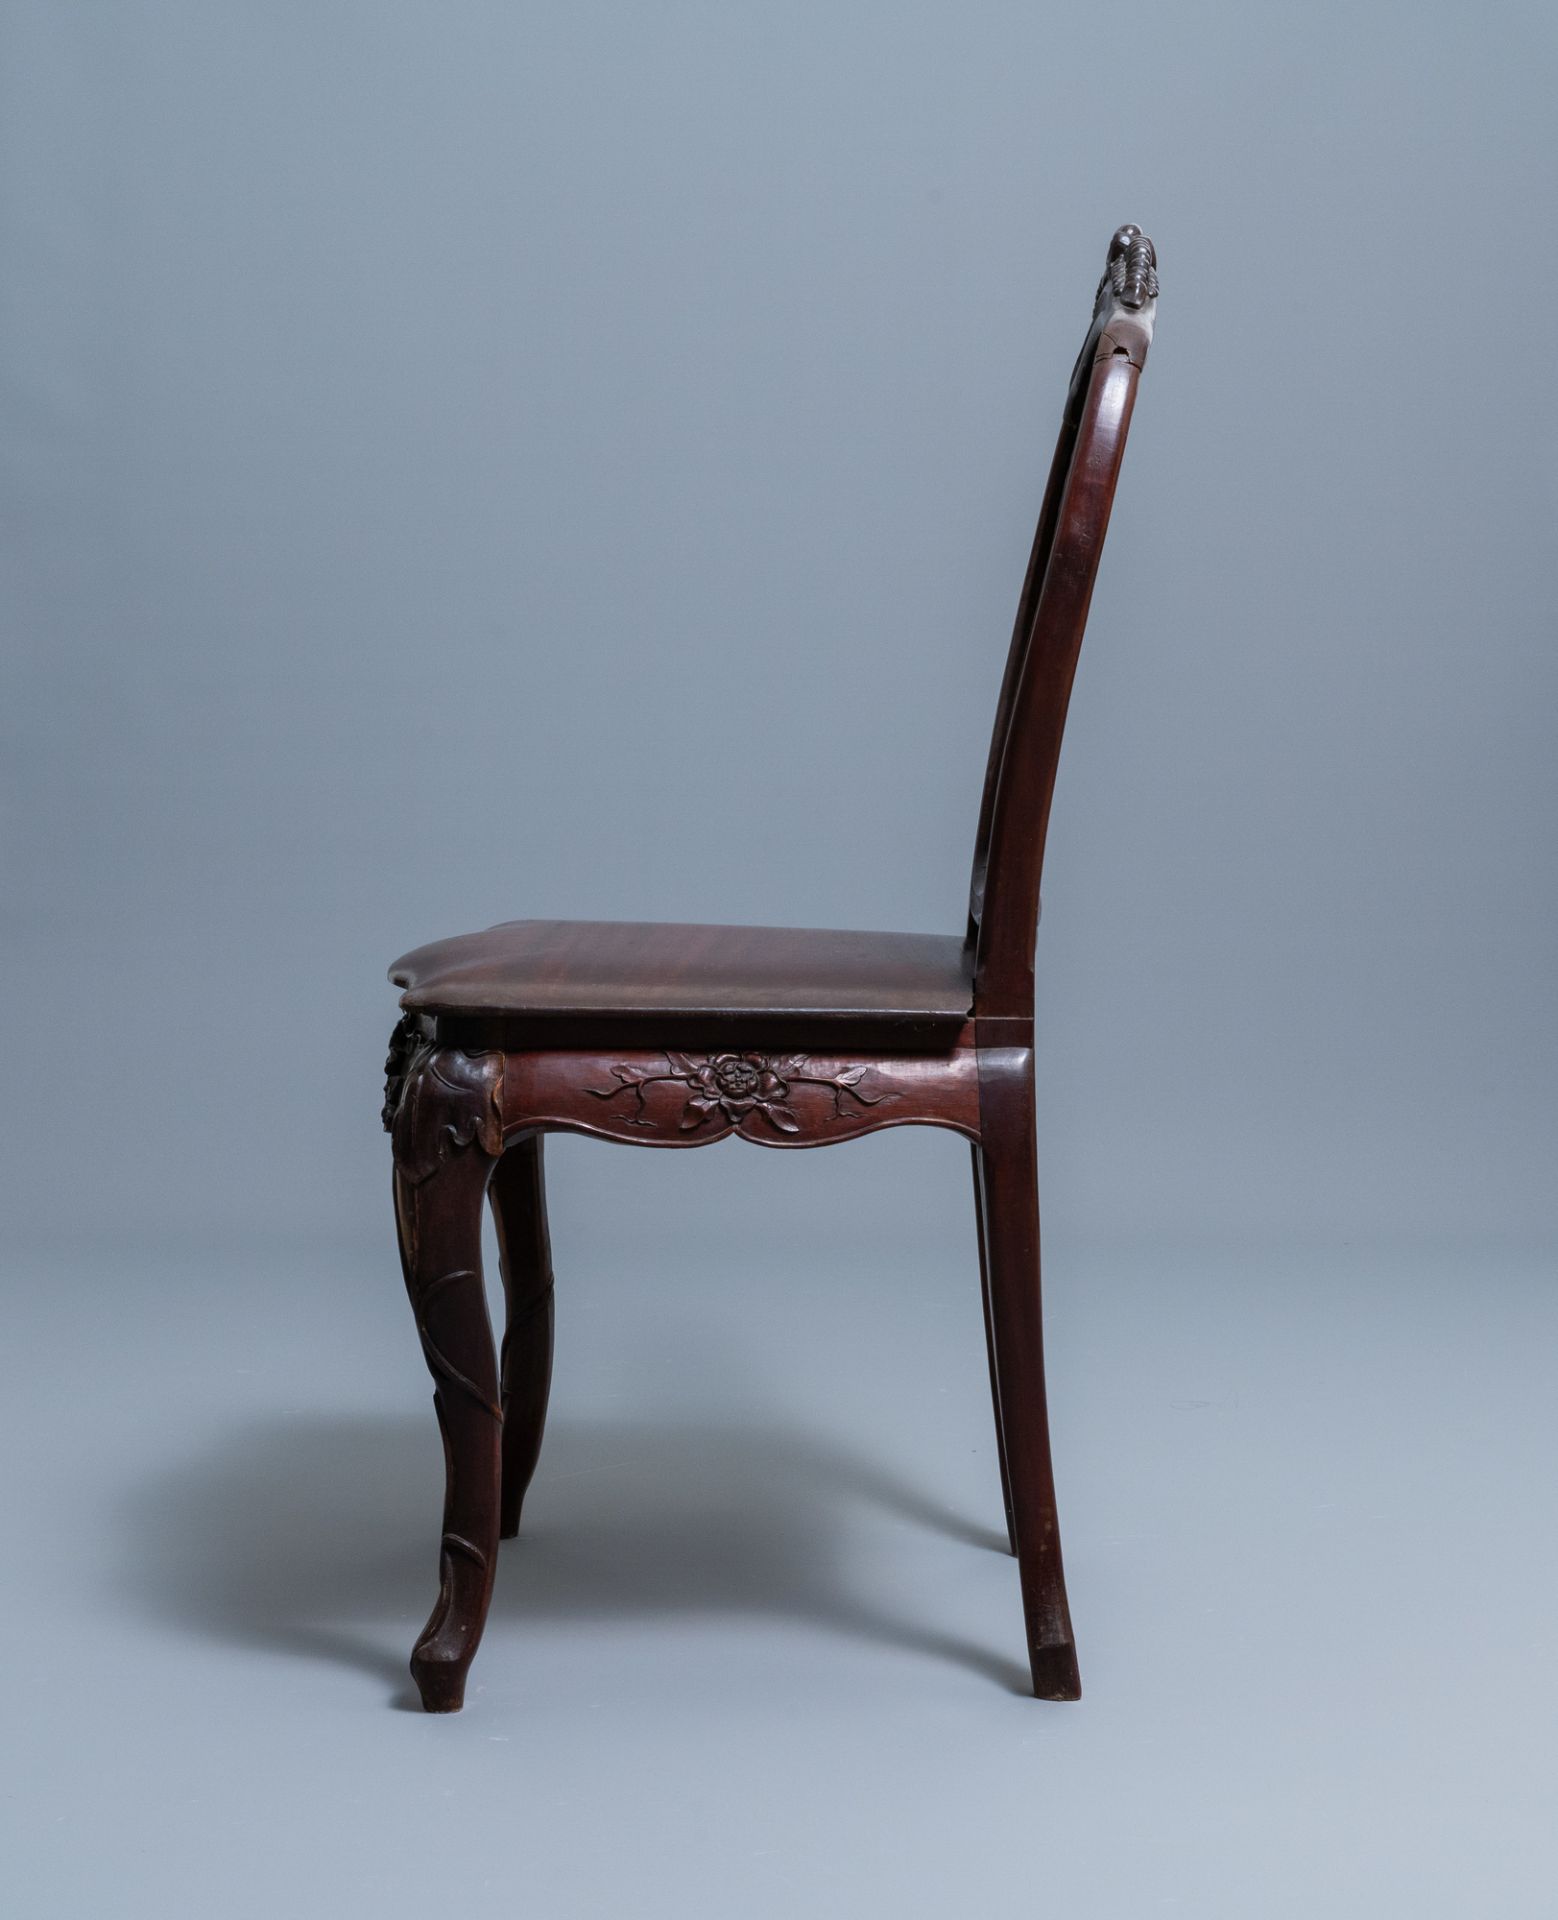 Four wooden chairs with reticulated backs, Macao or Portuguese colonial, 19th C. - Image 21 of 47